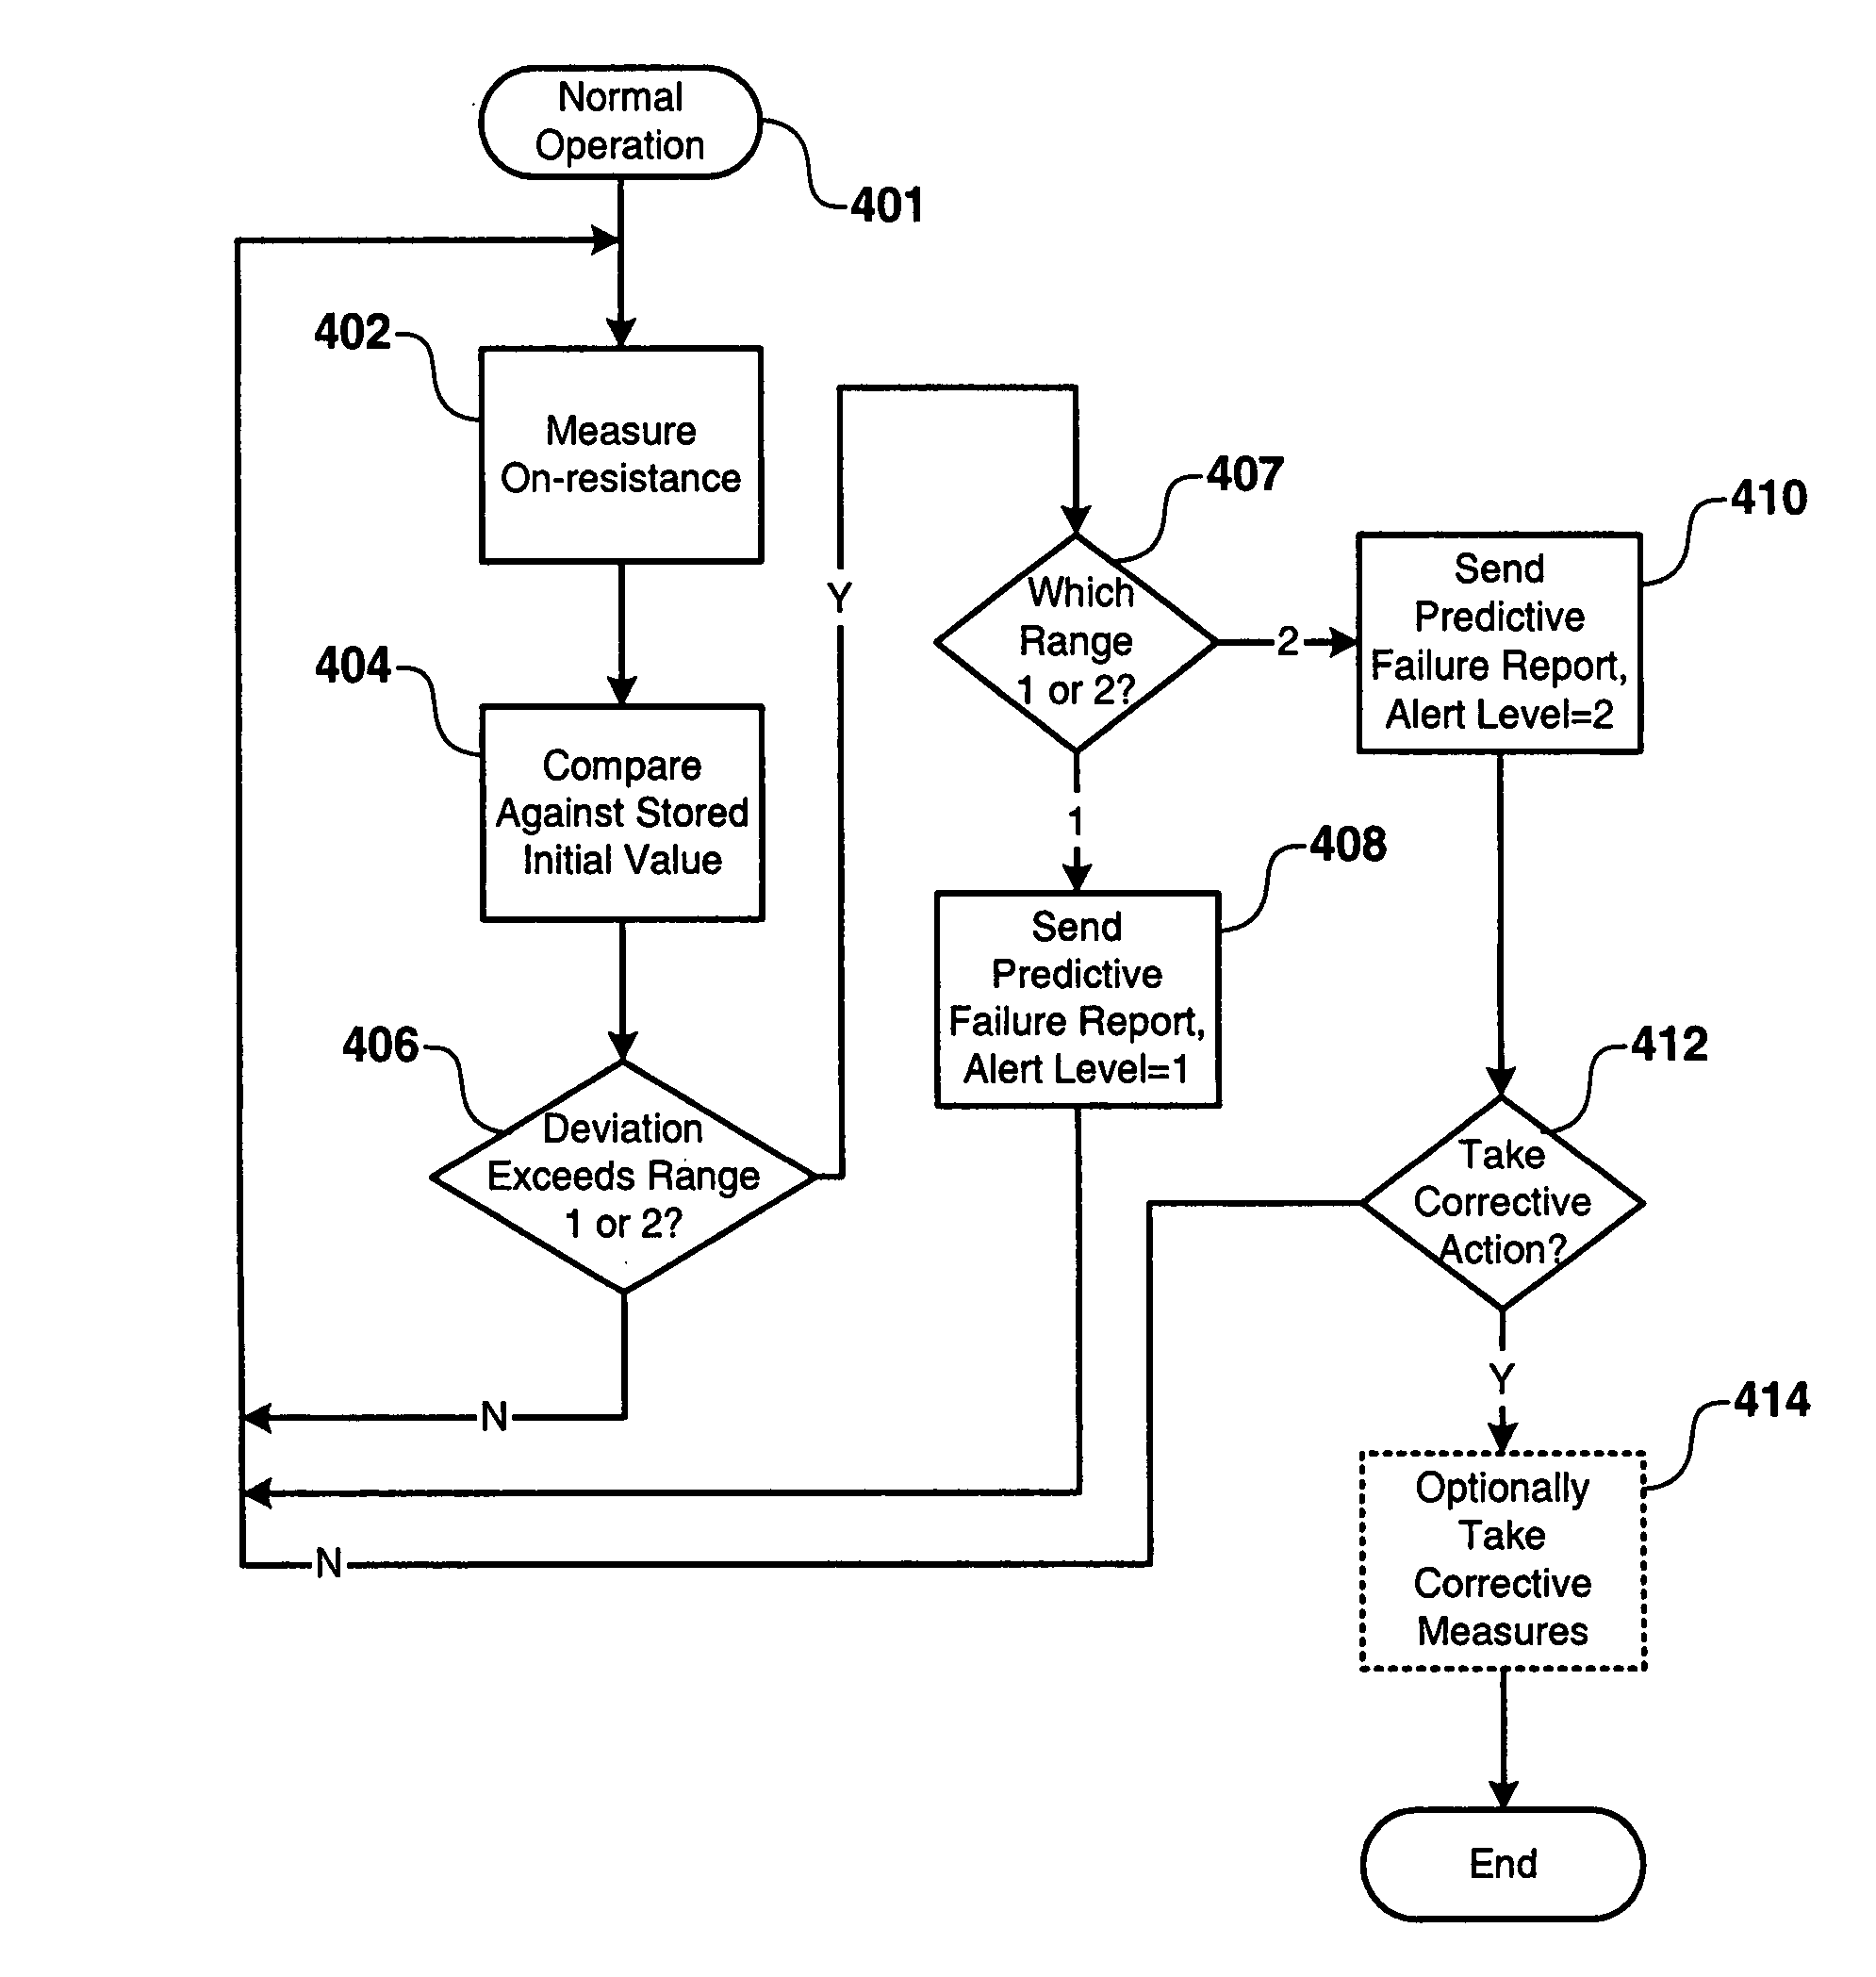 Apparatus employing predictive failure analysis based on in-circuit FET on-resistance characteristics